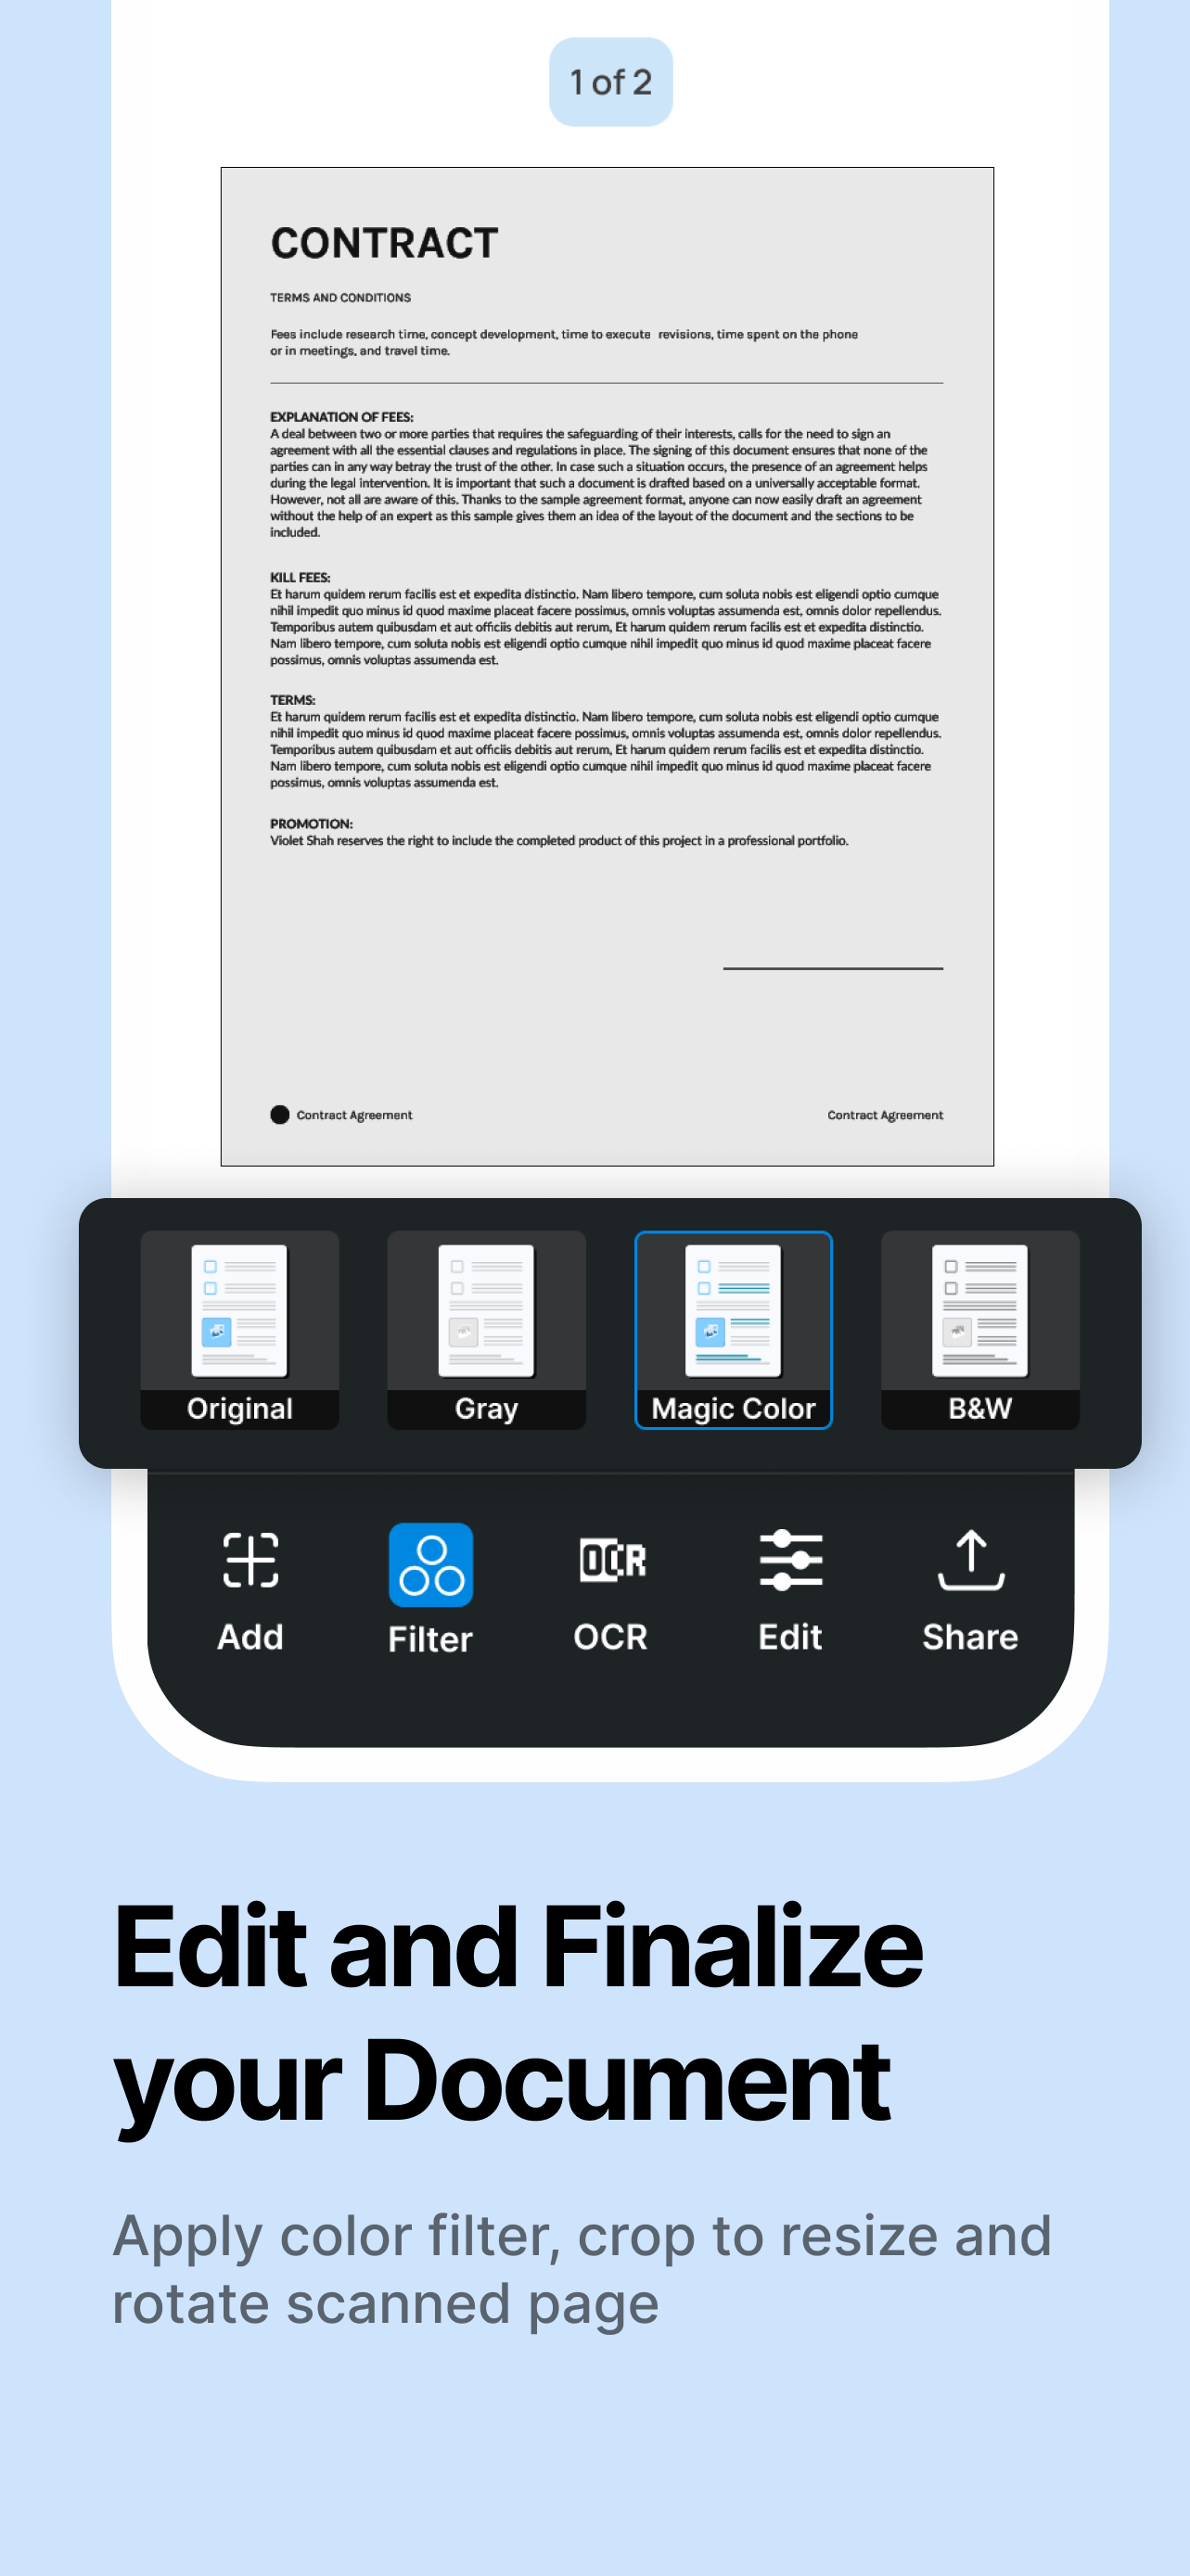 Edit and Finalize your Document with QuickScan